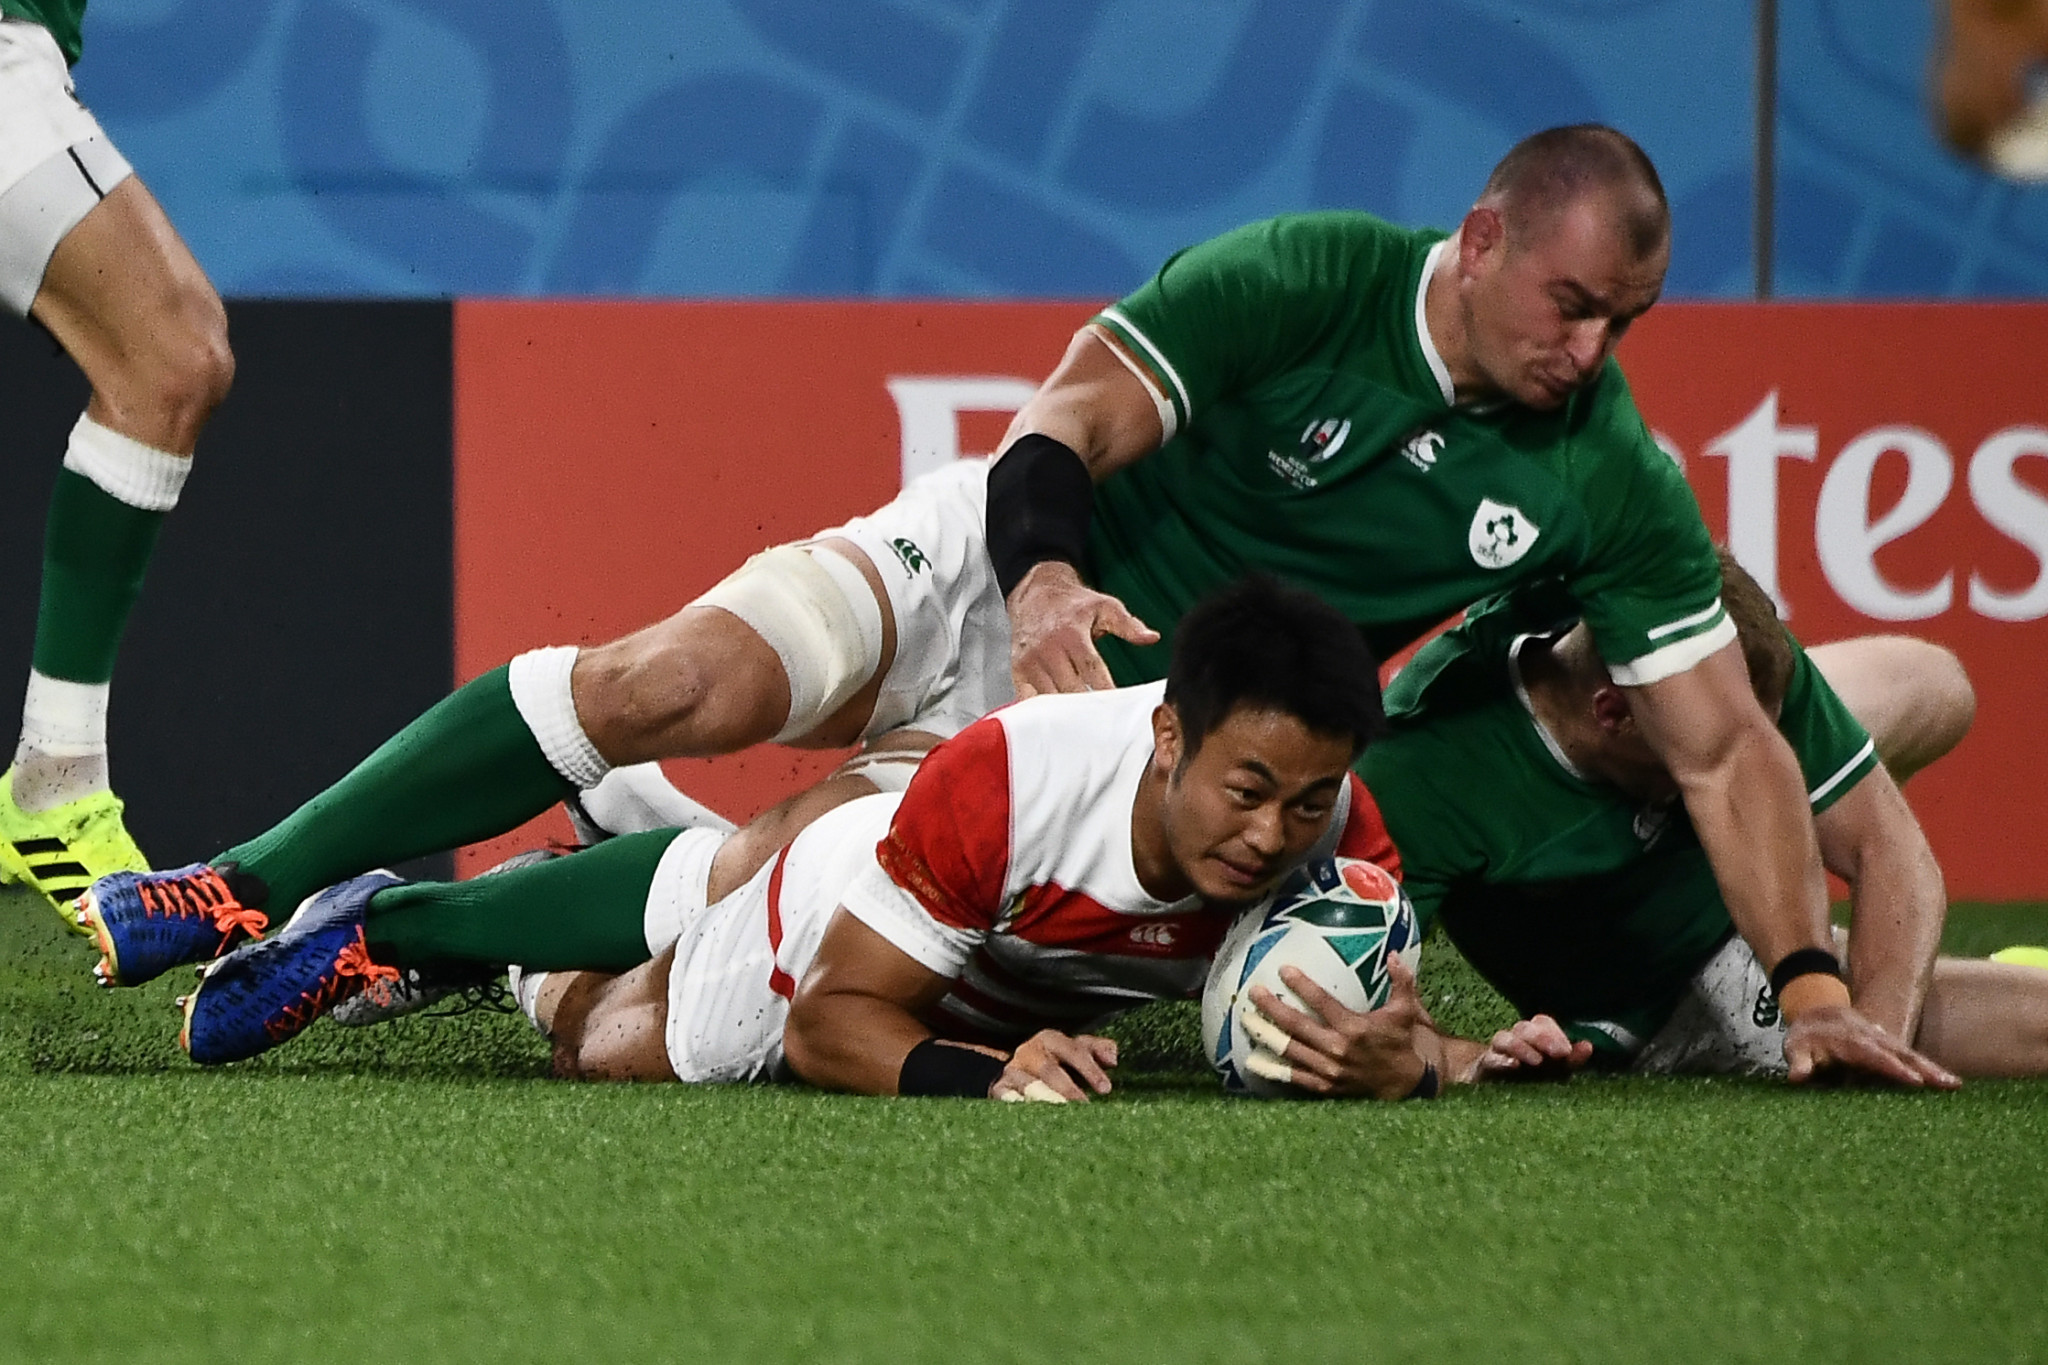 The moment that lifted a nation - Kenki Fukuoka scores against Ireland ©Getty Images